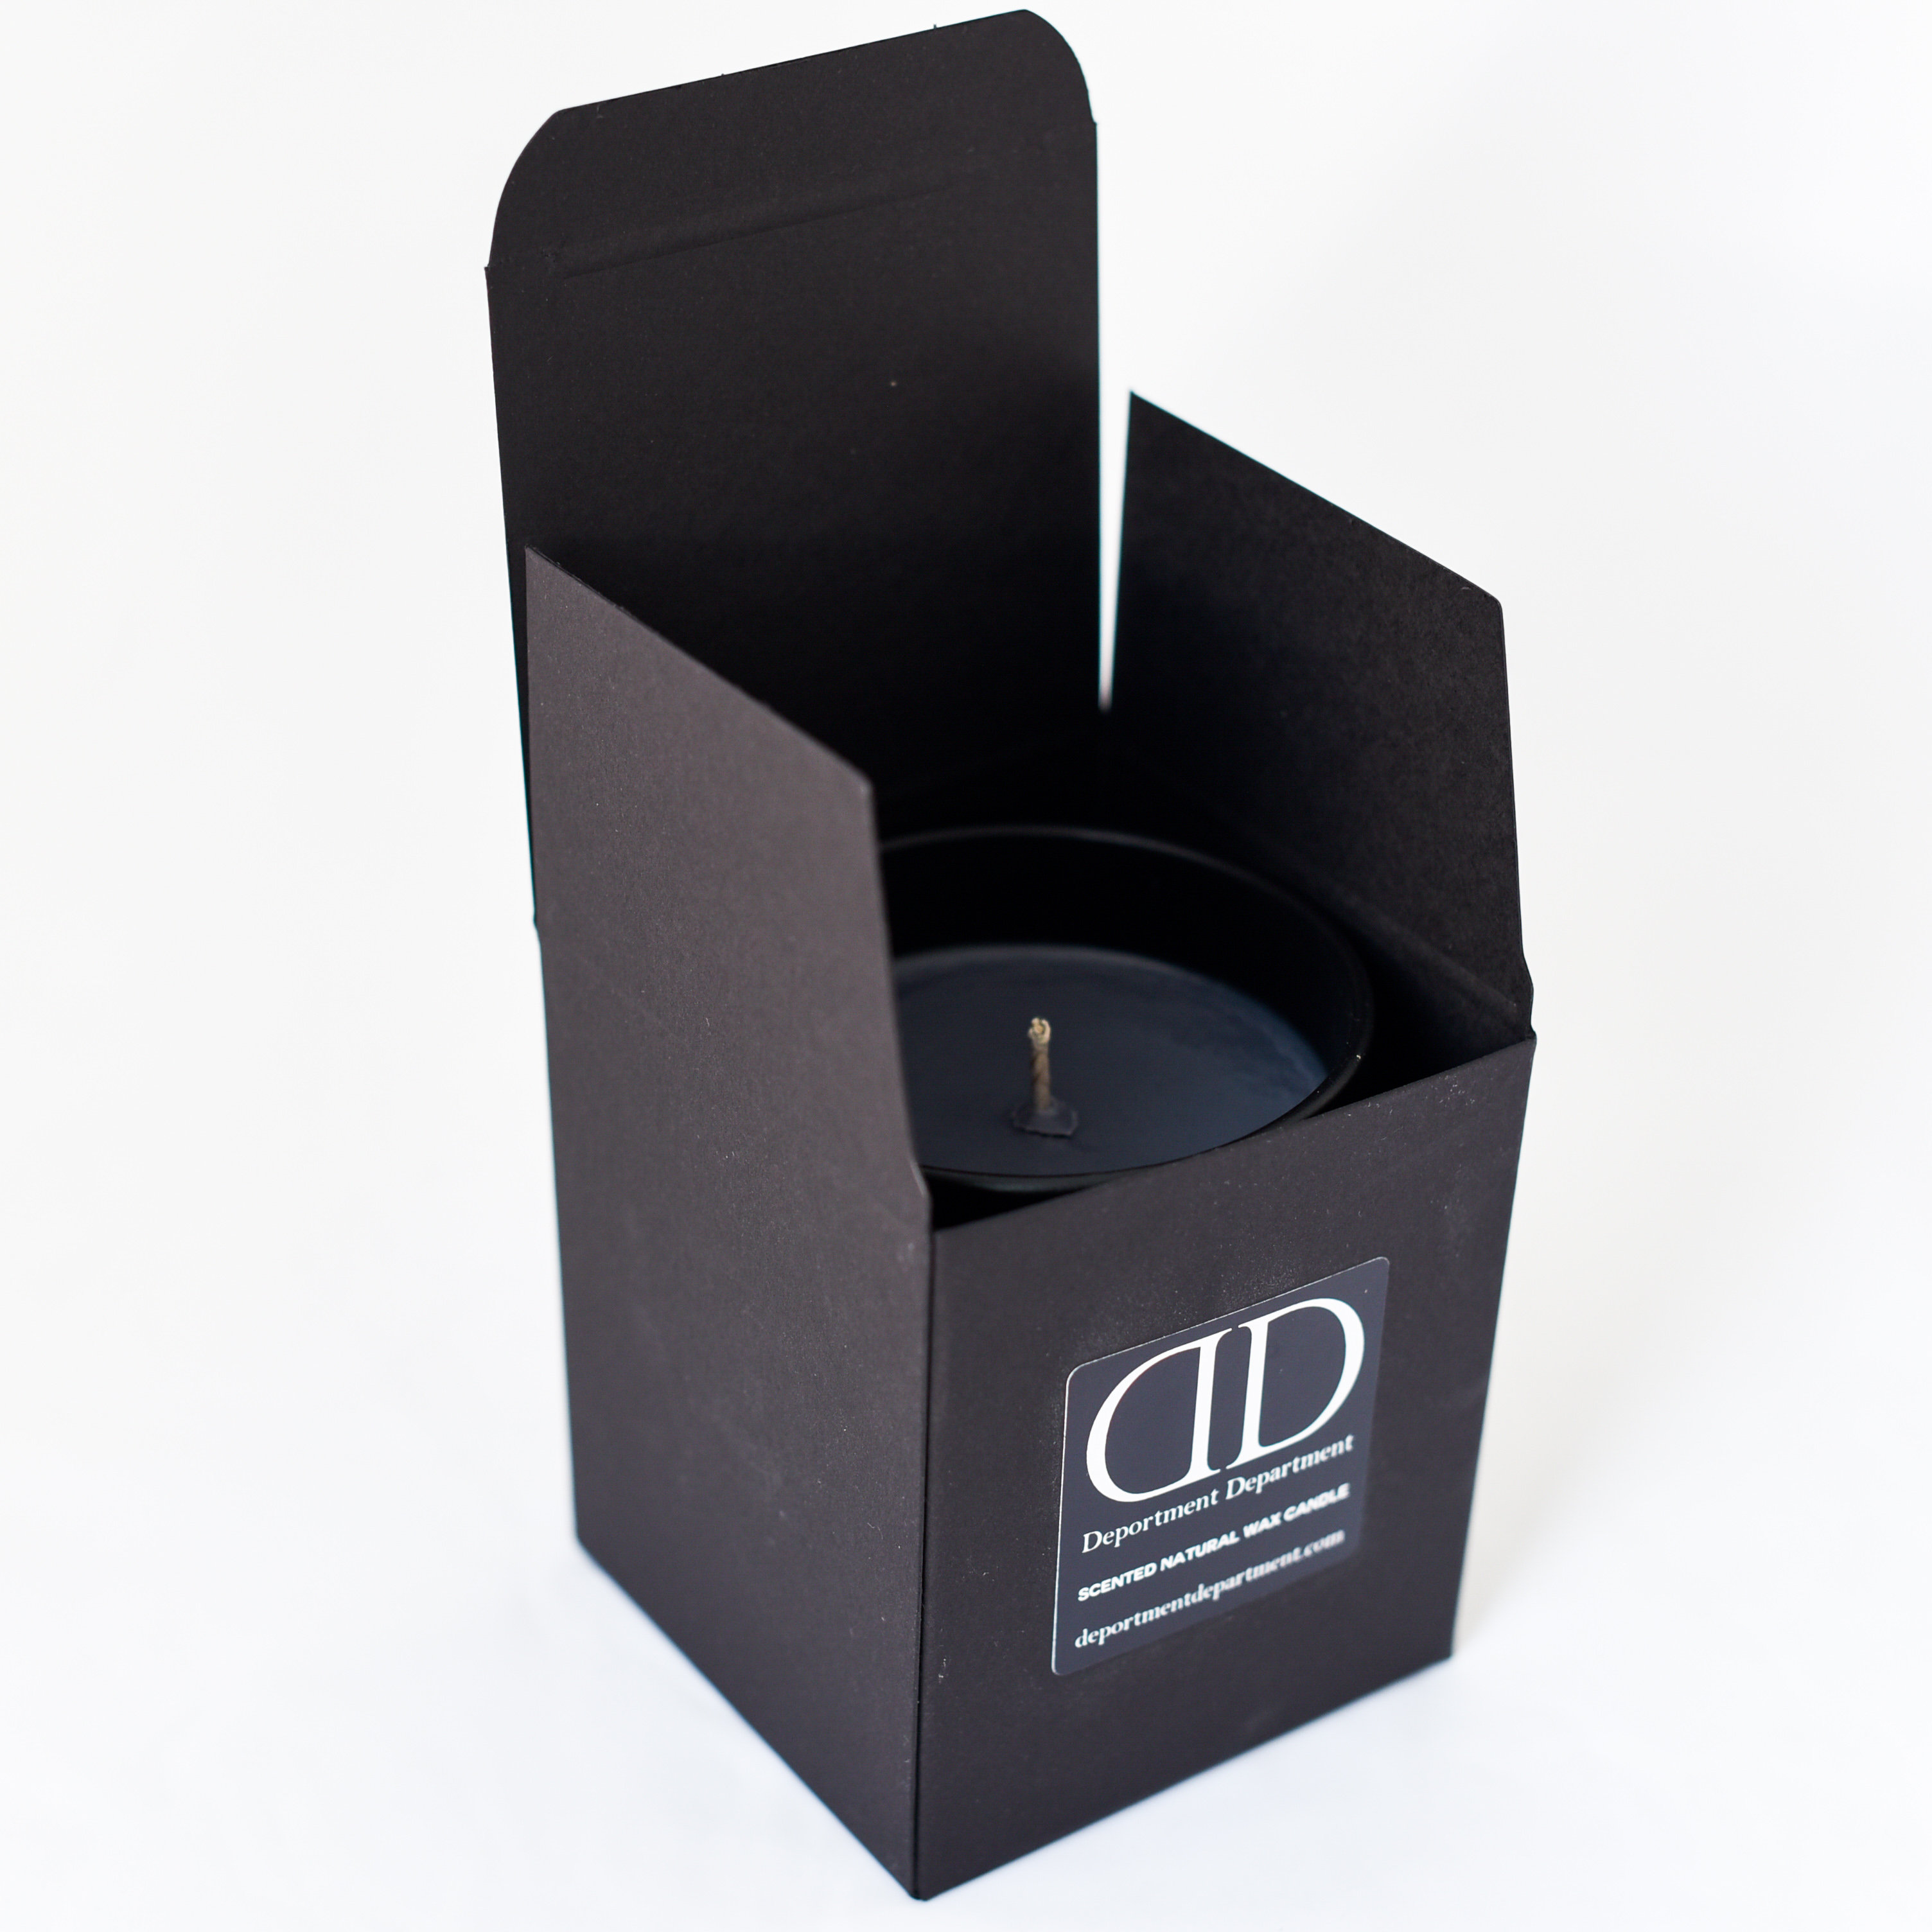 Deportment Department Gift Candle Romantic Fashion